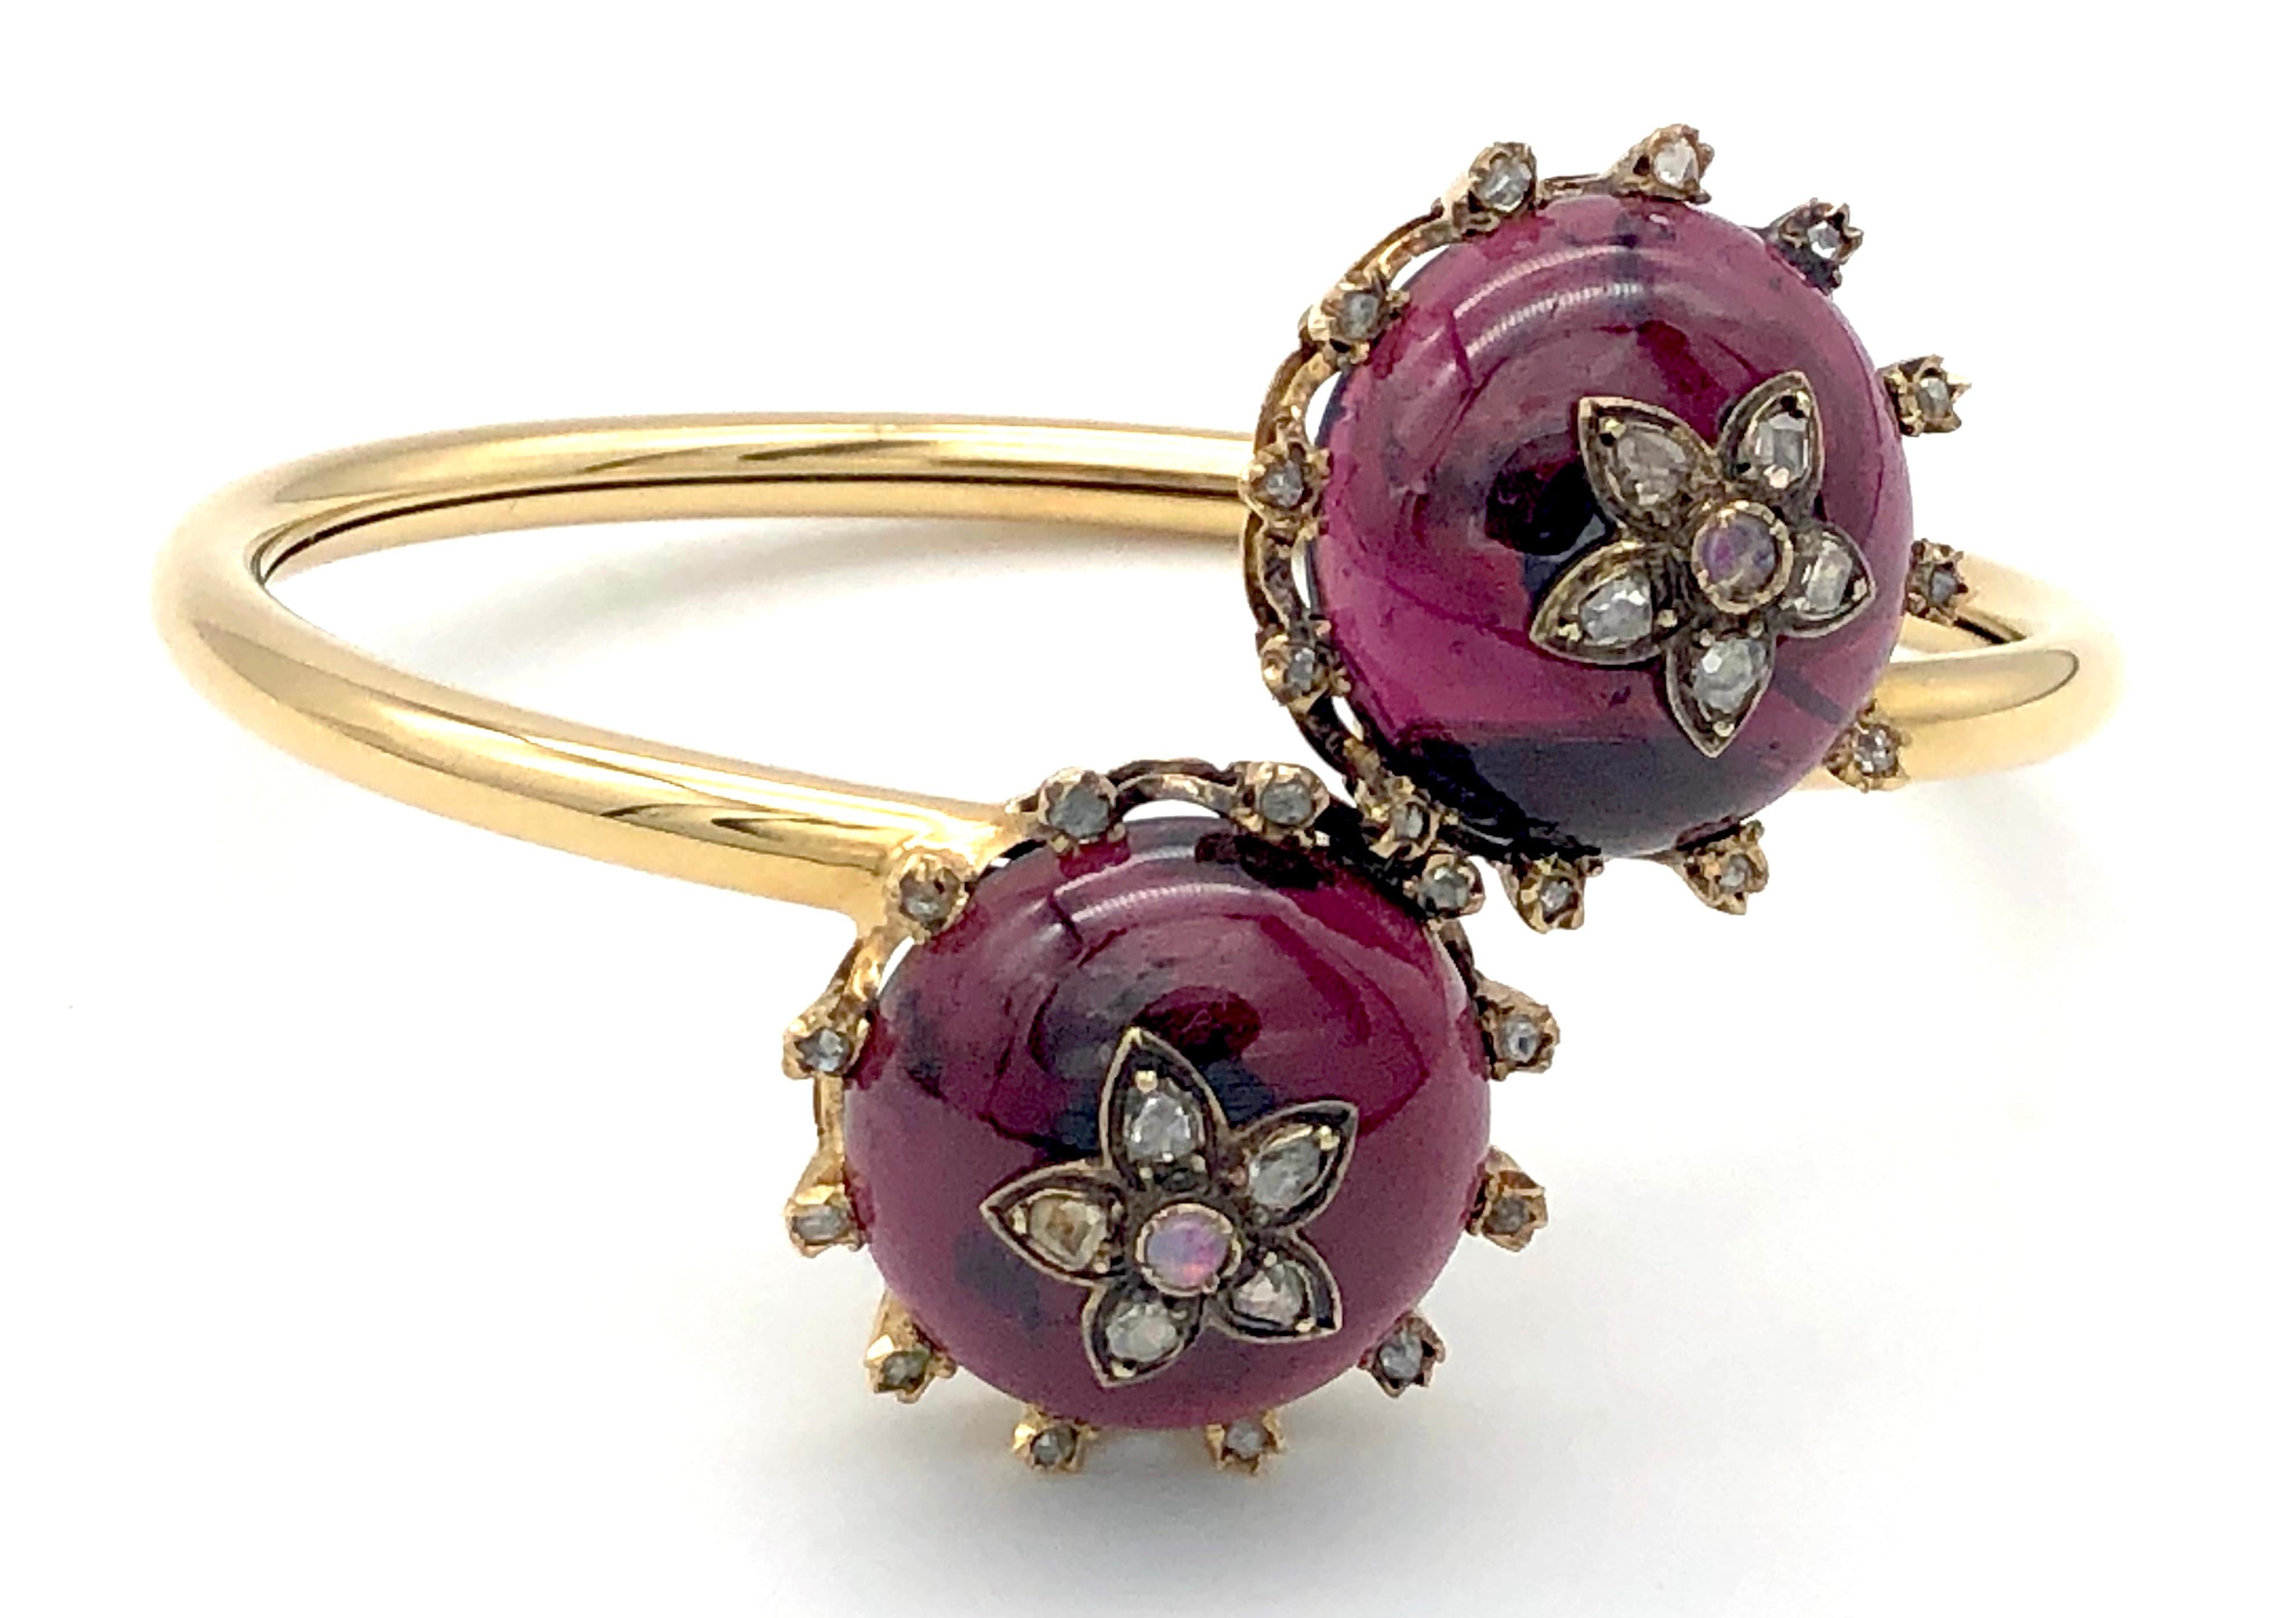 Two magnificent cabochon almandine garnets are mounted in settings reminiscent of crowns with twelve diamond set points.  Each almandin is embellished with a flower set with five rose diamonds and an opal in it's centre.
The cabochons have been